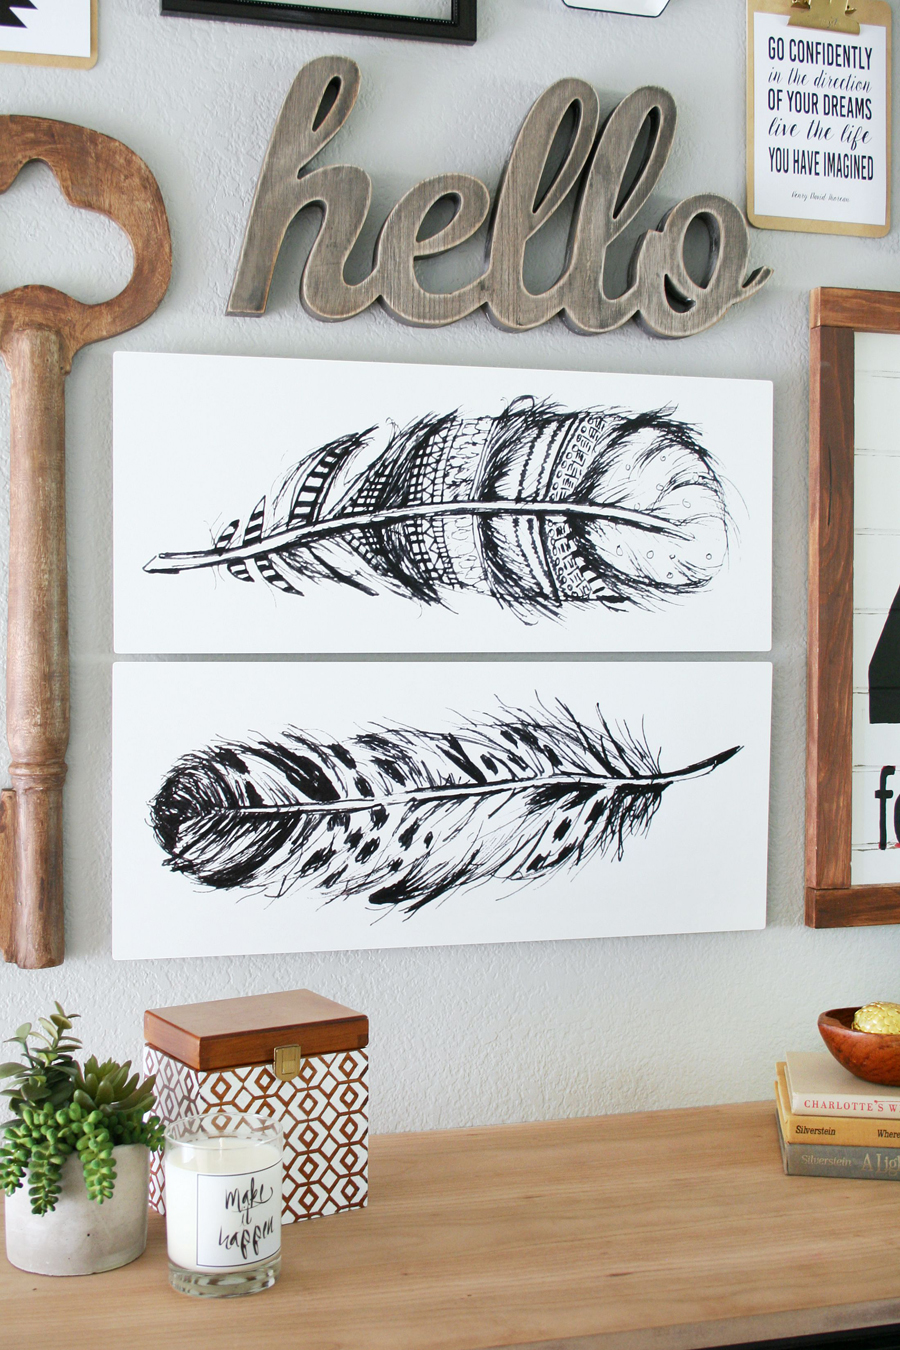 Create Meaningful Decor with Shutterfly